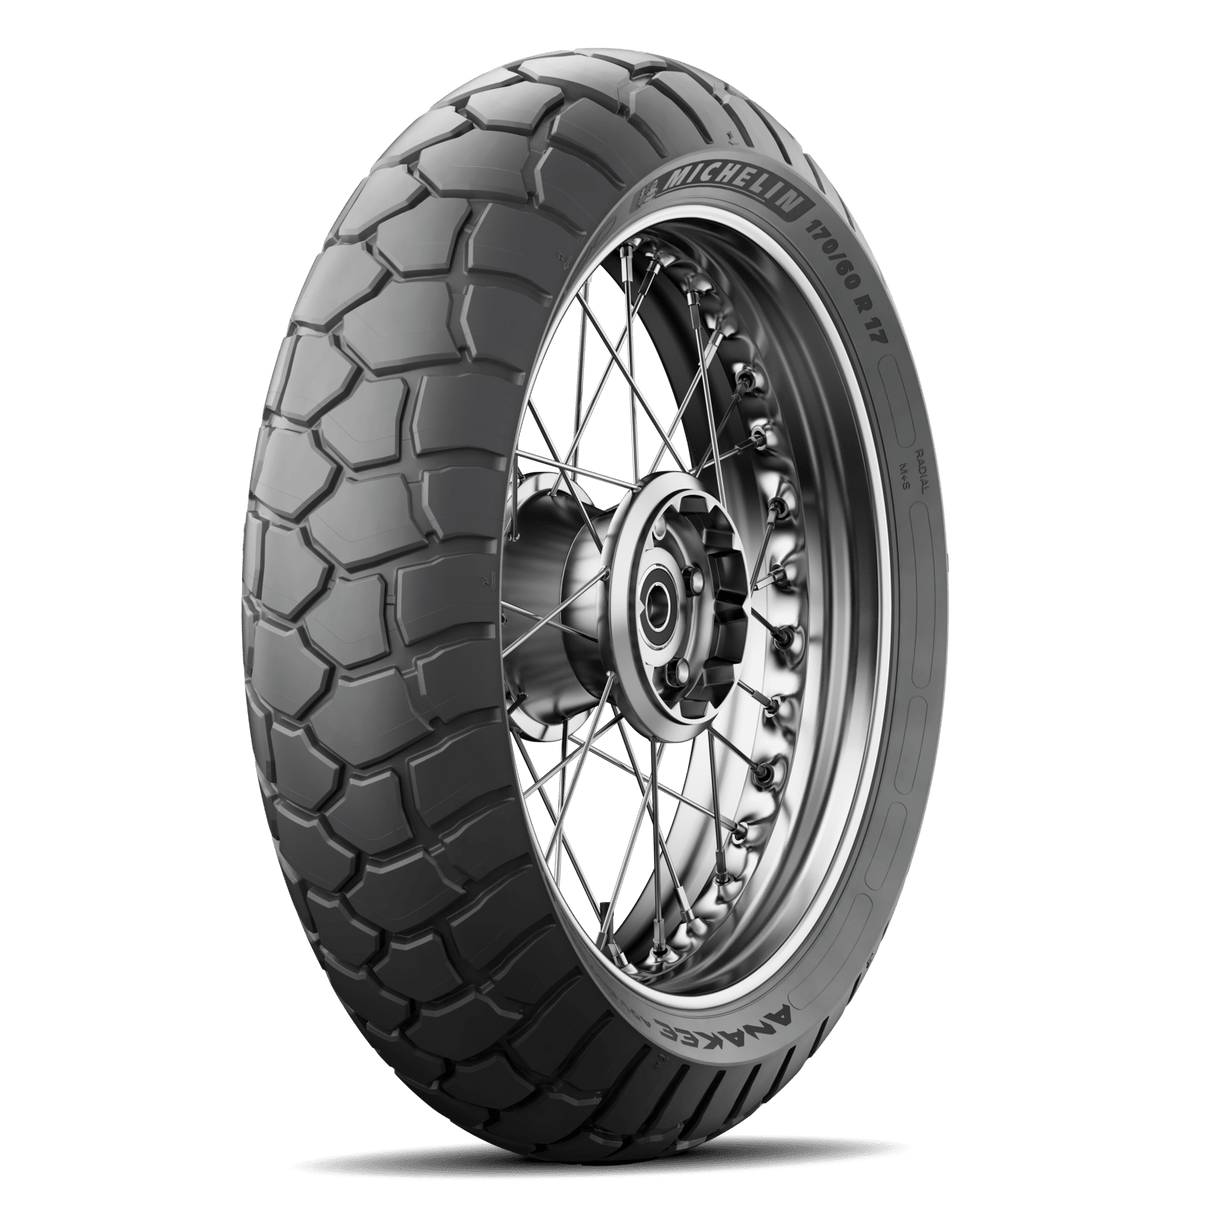 Michelin Anakee Adventure 180/55R-17 73V Rear Tyre